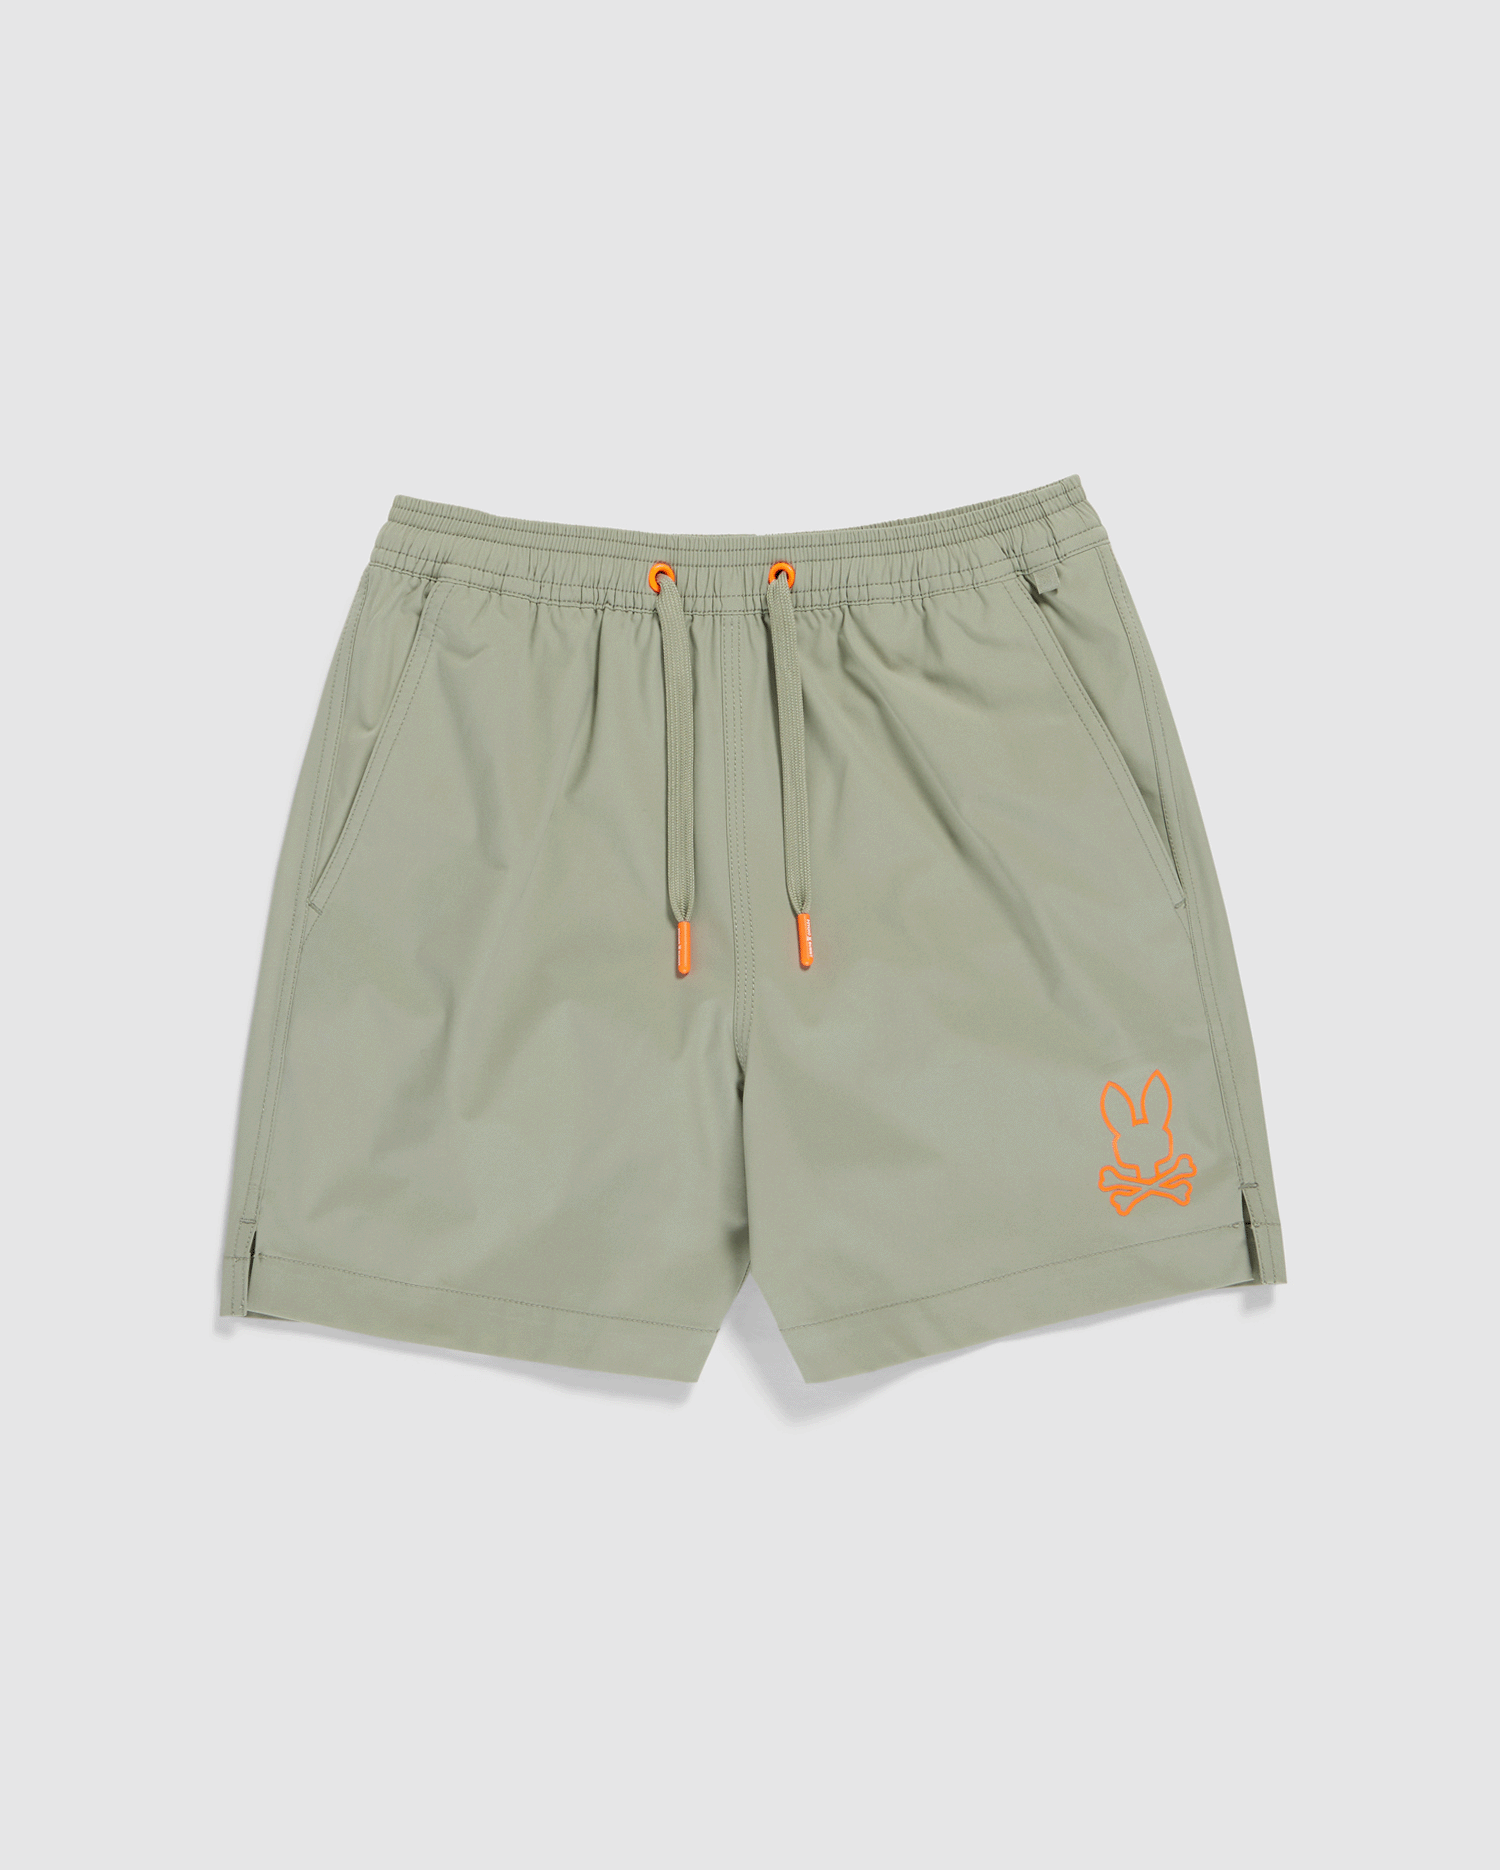 A pair of light green athletic shorts featuring an elastic waistband with orange drawstrings. The quick-drying shorts have pockets on both sides and an orange embroidered logo of a rabbit with crossbones on the left leg, making them perfect for active days. Comes with a waterproof bag for convenience.

Product Name: KIDS PARKER HYDROCHROMIC SWIM TRUNK - B0W646C200
Brand Name: Psycho Bunny